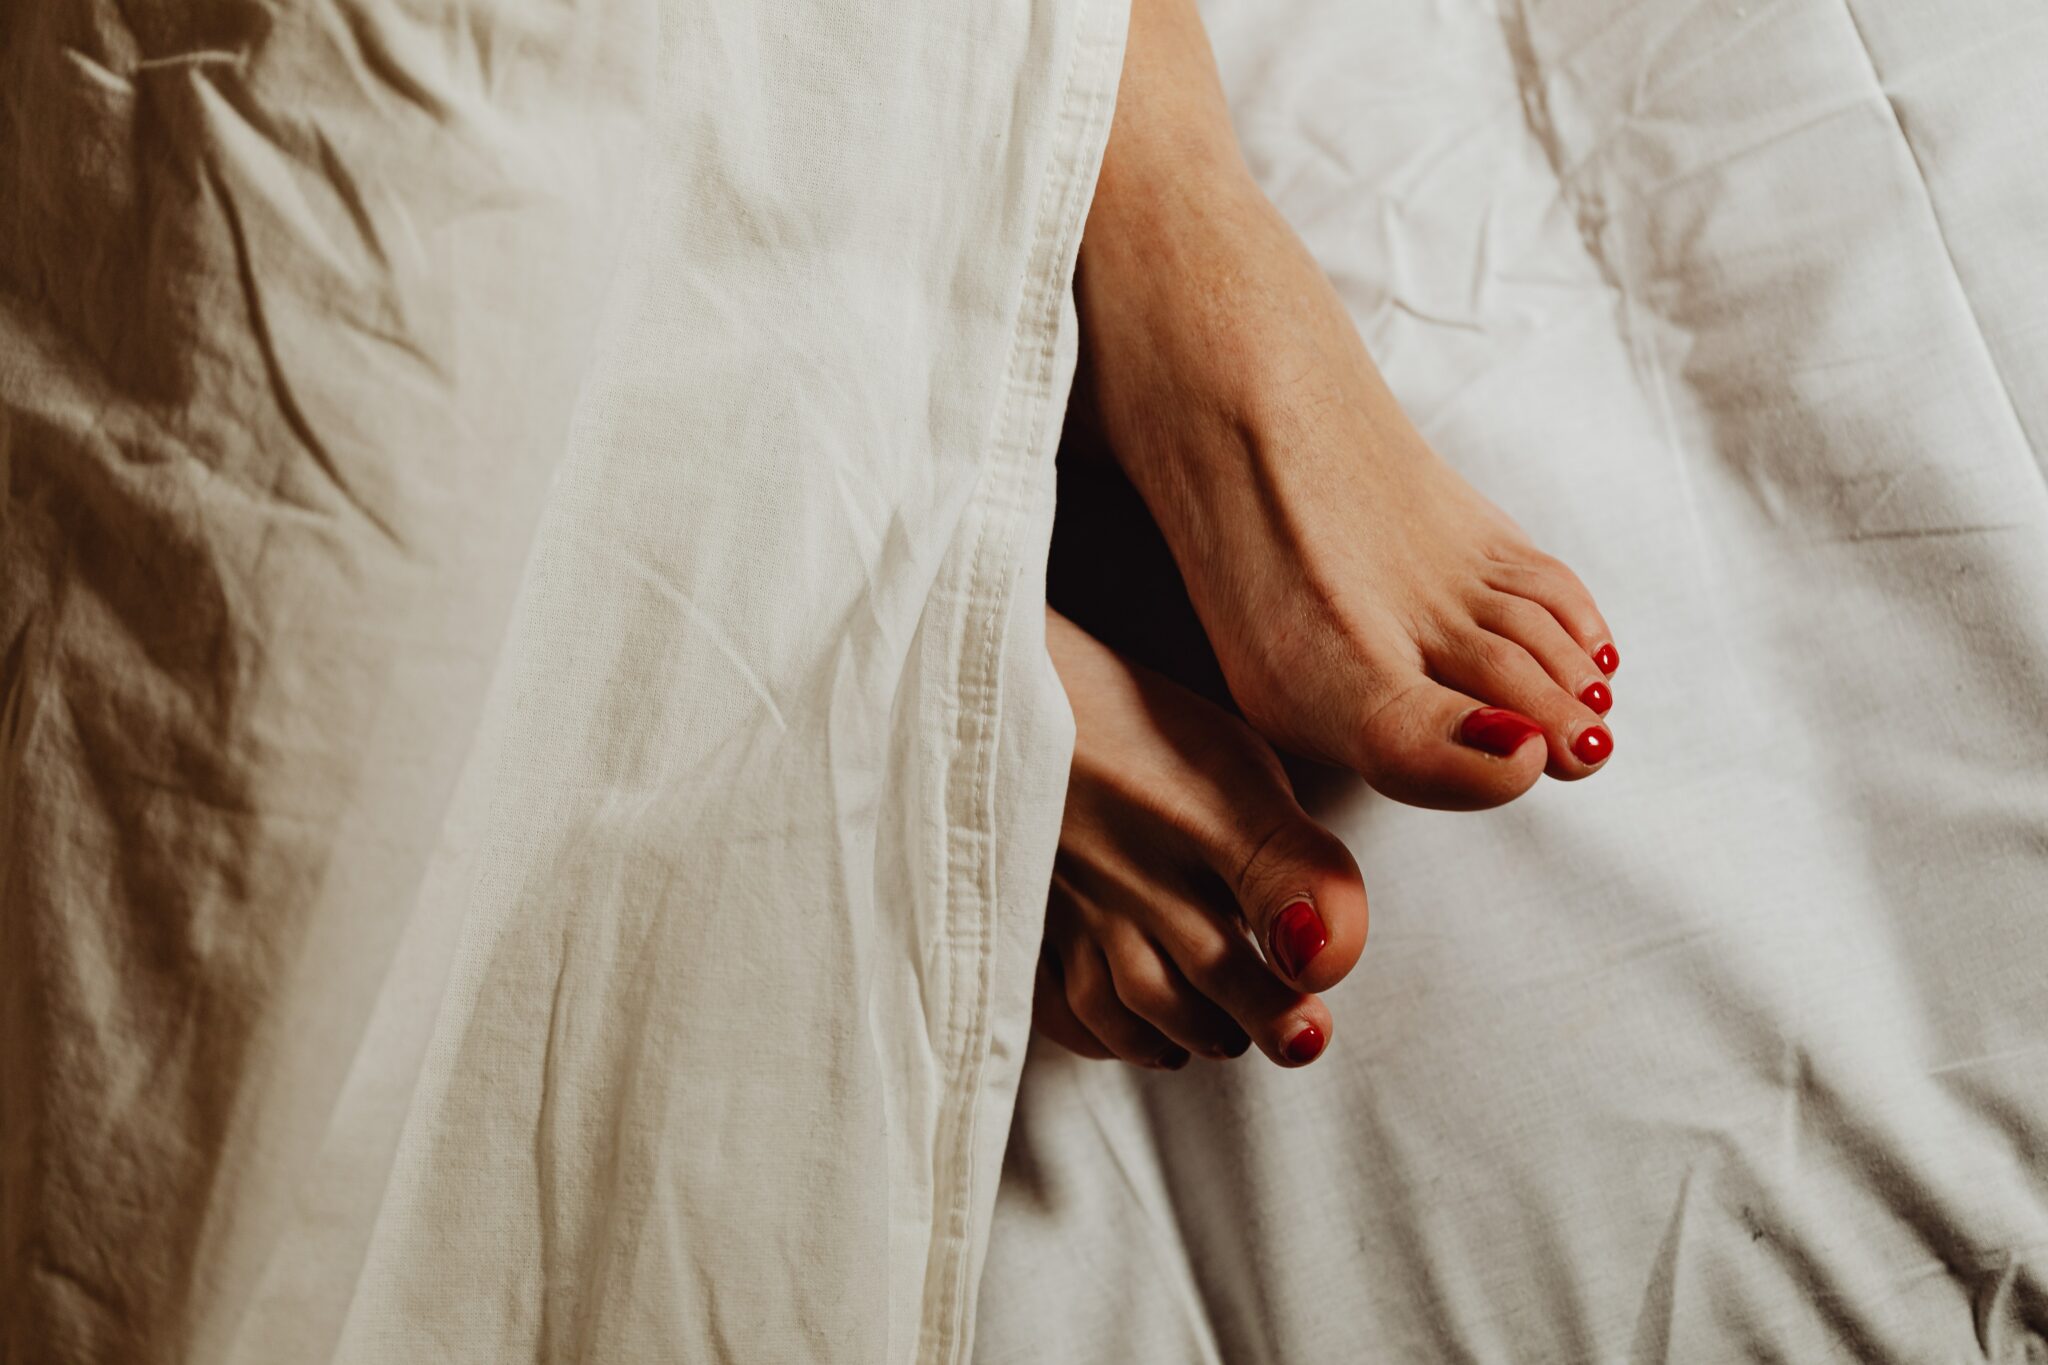 A woman's feet with red-painted toes tucked under white bed sheets